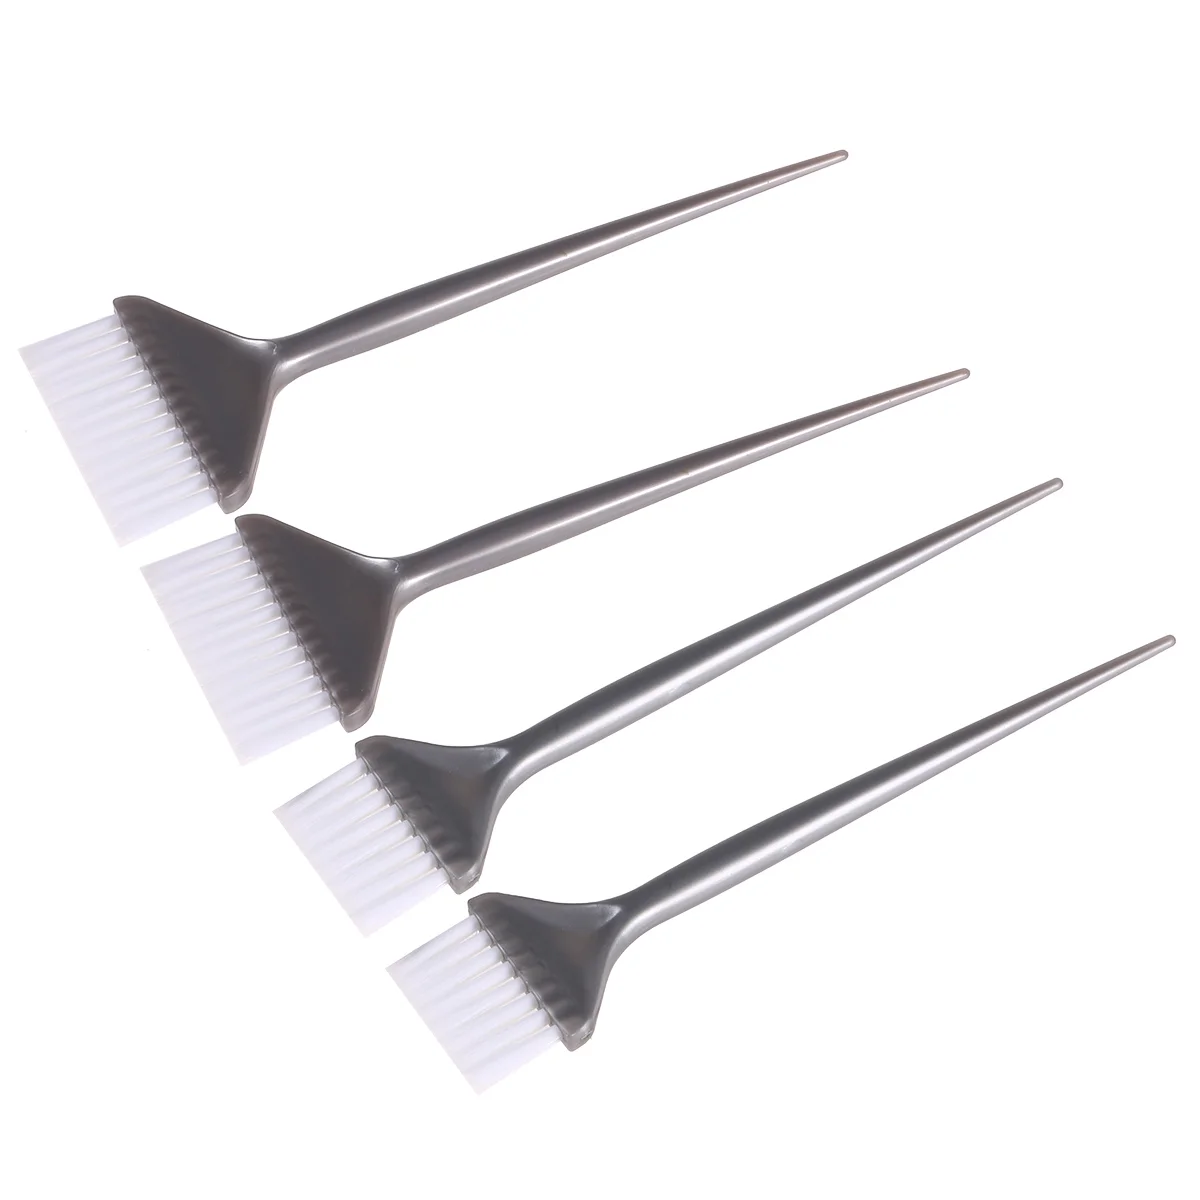 

6PCS Hair Dyeing Brushes Widened Coloring Comb Hair Tint Brush Hair Salon Tools for Home Shop (5cm,7cm 3pcs for Each)